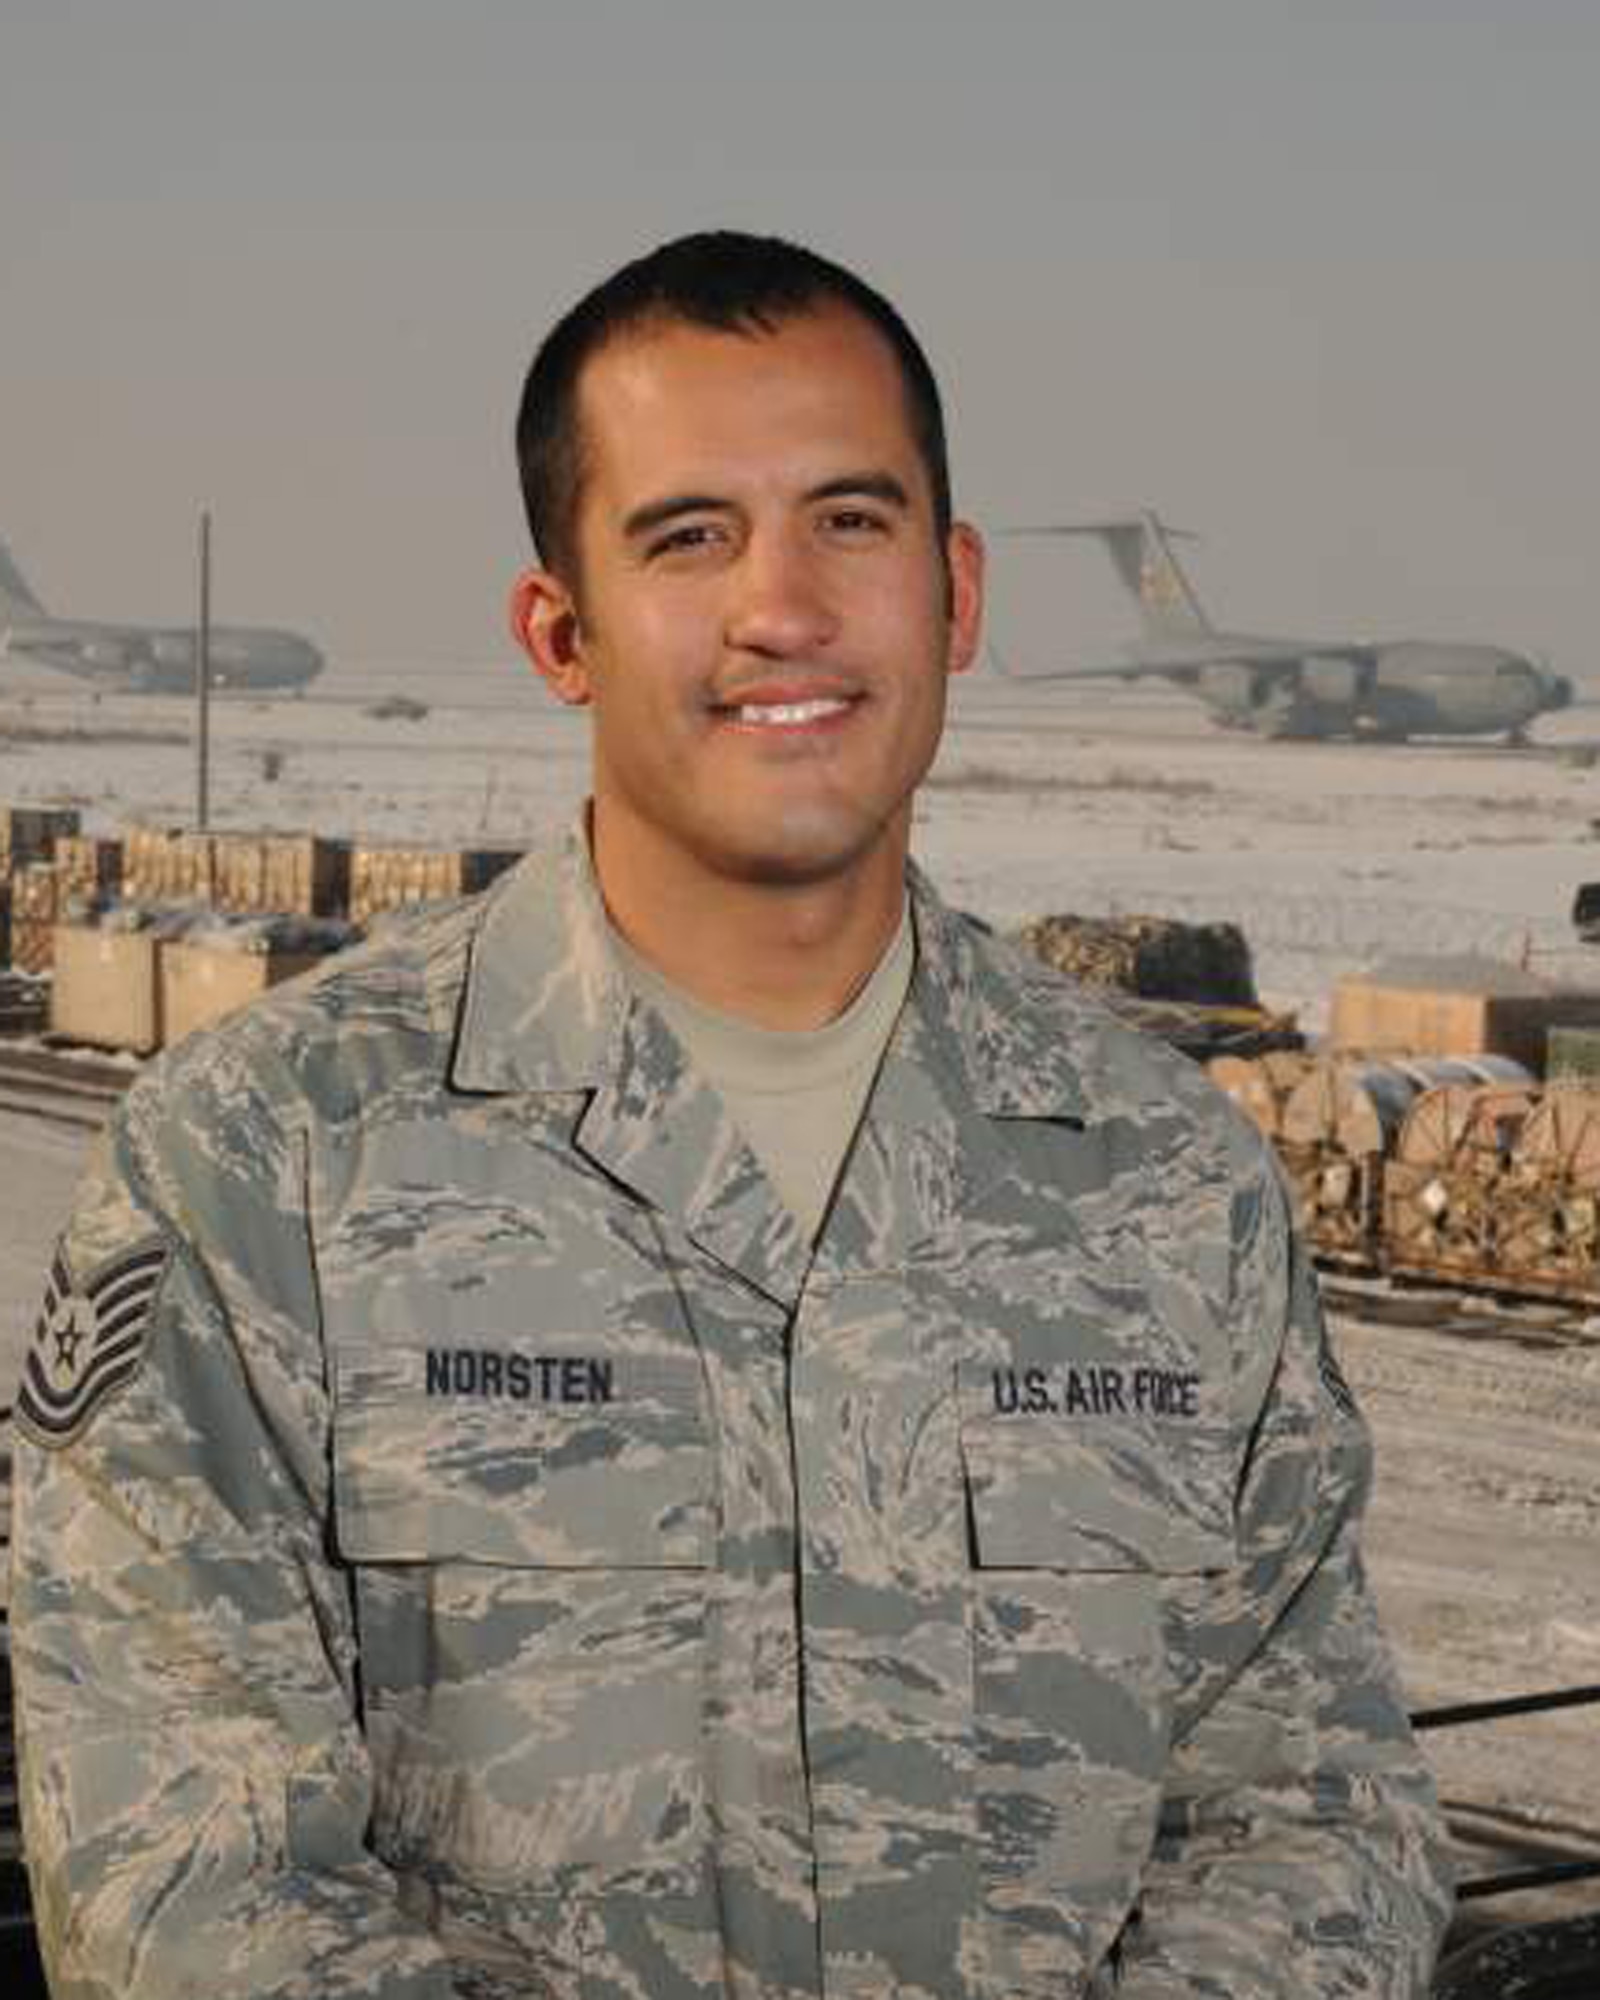 Tech. Sgt. Jacob Norsten of the small air terminal at the 133rd Logistics Readiness Squadron pauses near the flightline of a deployed location in November 2010 where he was working loading aircraft in support of Operation Enduring Freedom and Operation New Dawn. Norsten has been selected to represent Minnesota as the Air Guard Outstanding NCO for 2011.